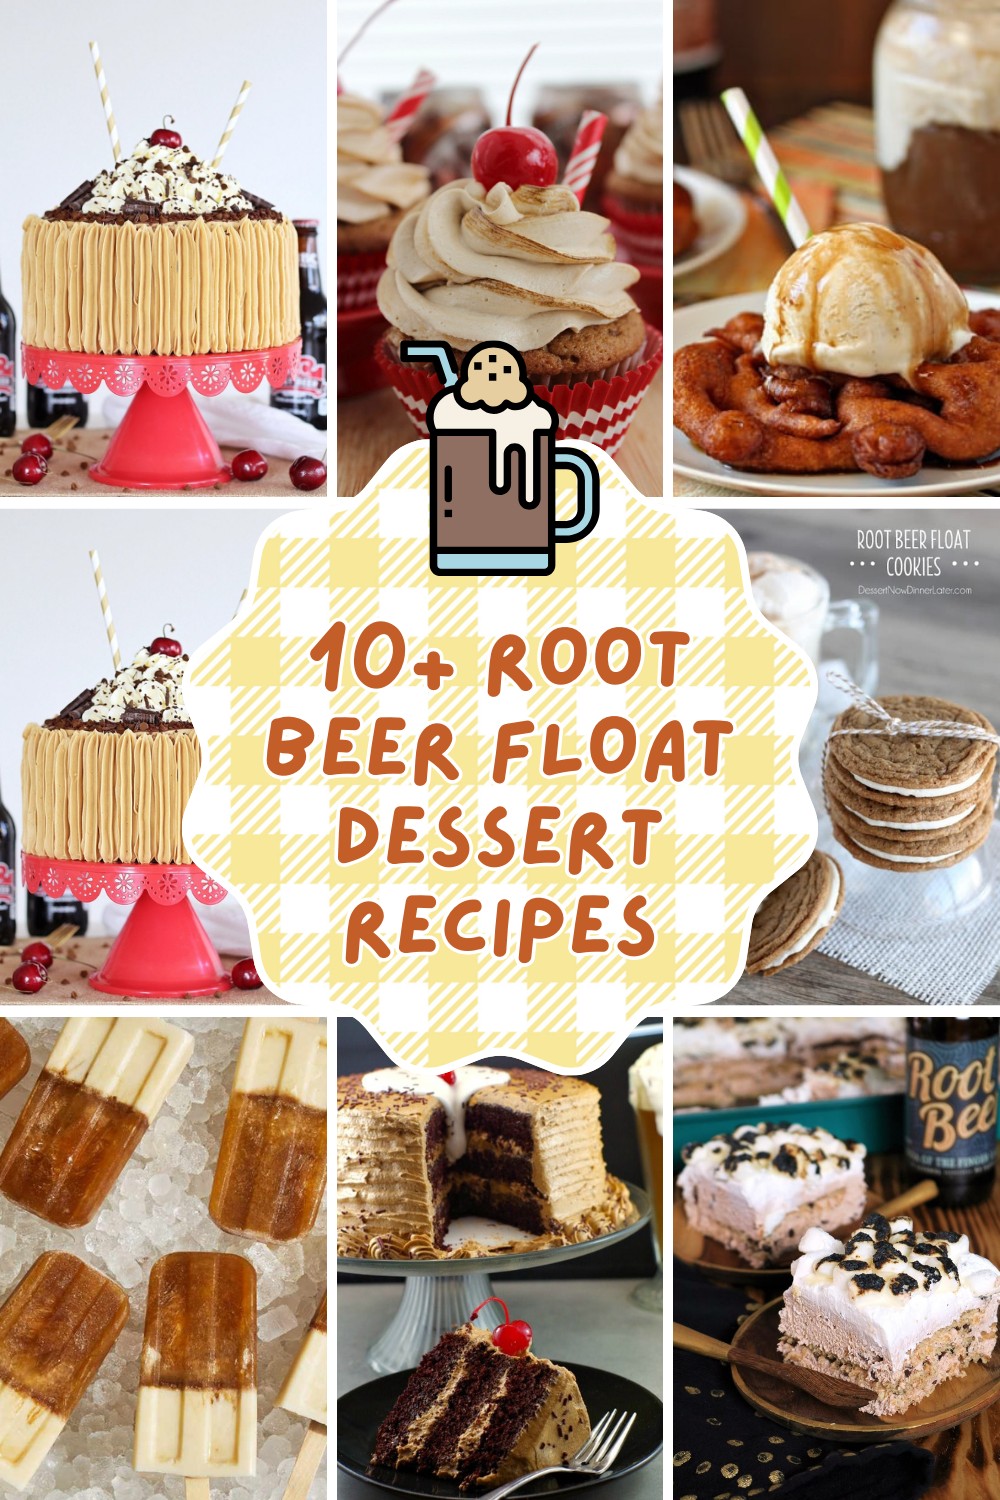 Indulge in the nostalgic flavors of these 10 root beer float desserts! 🍰✨ Enjoy the moist Root Beer Float Cake, chewy Root Beer Float Cookies, and creamy No-Bake Root Beer Float Cheesecake Bars. Perfect for summer gatherings or a sweet treat anytime! #RootBeerFloat #DessertLovers #YummyTreats

